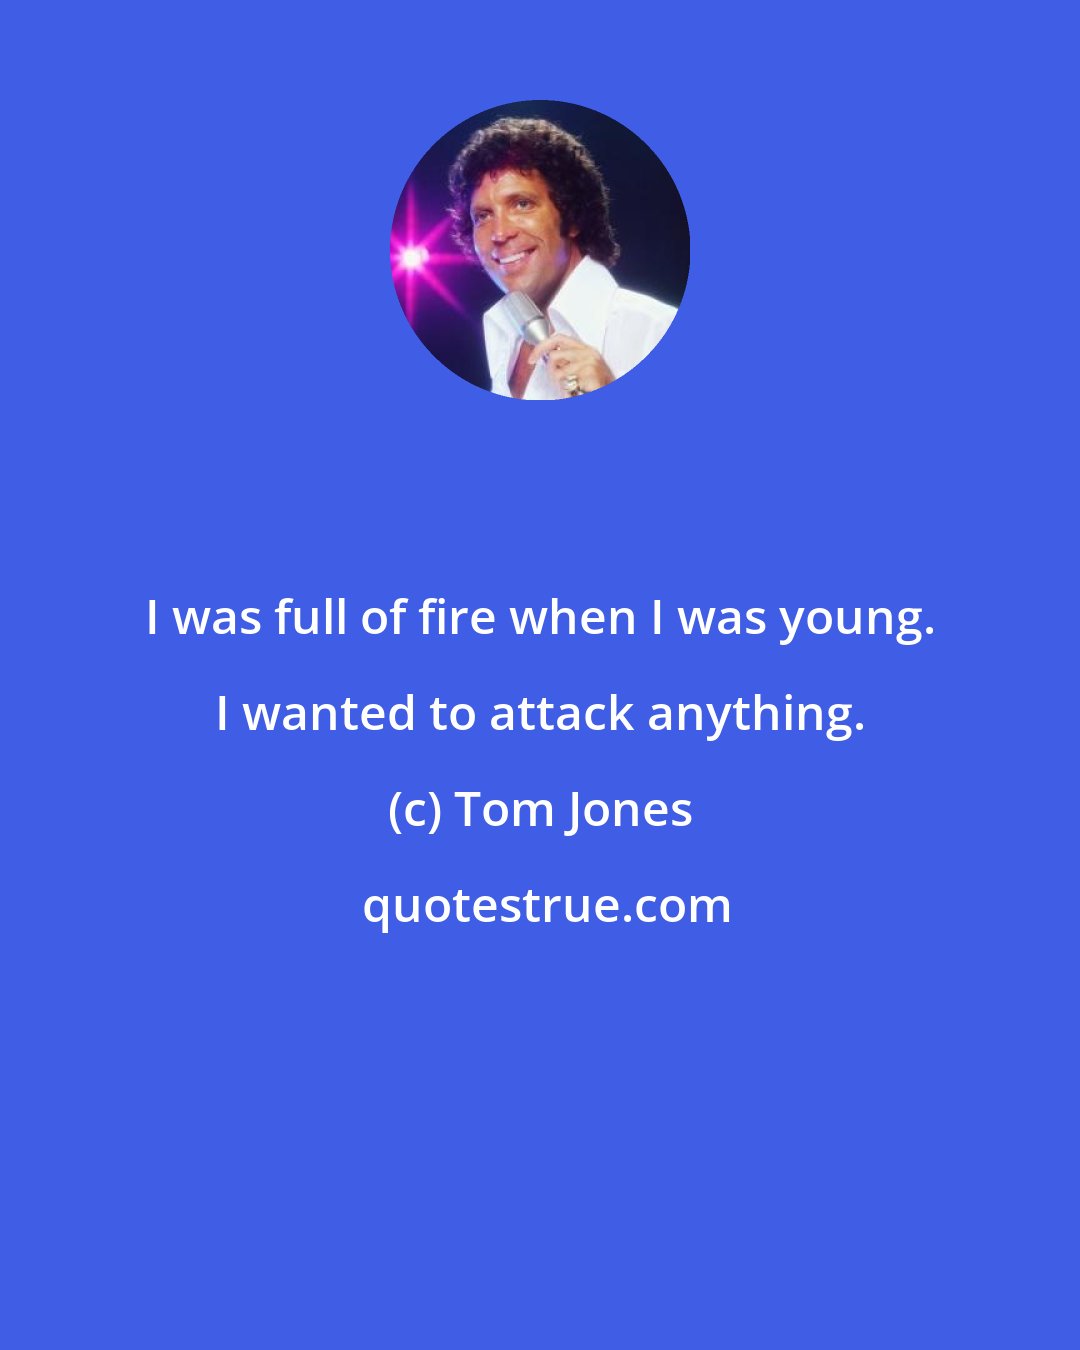 Tom Jones: I was full of fire when I was young. I wanted to attack anything.